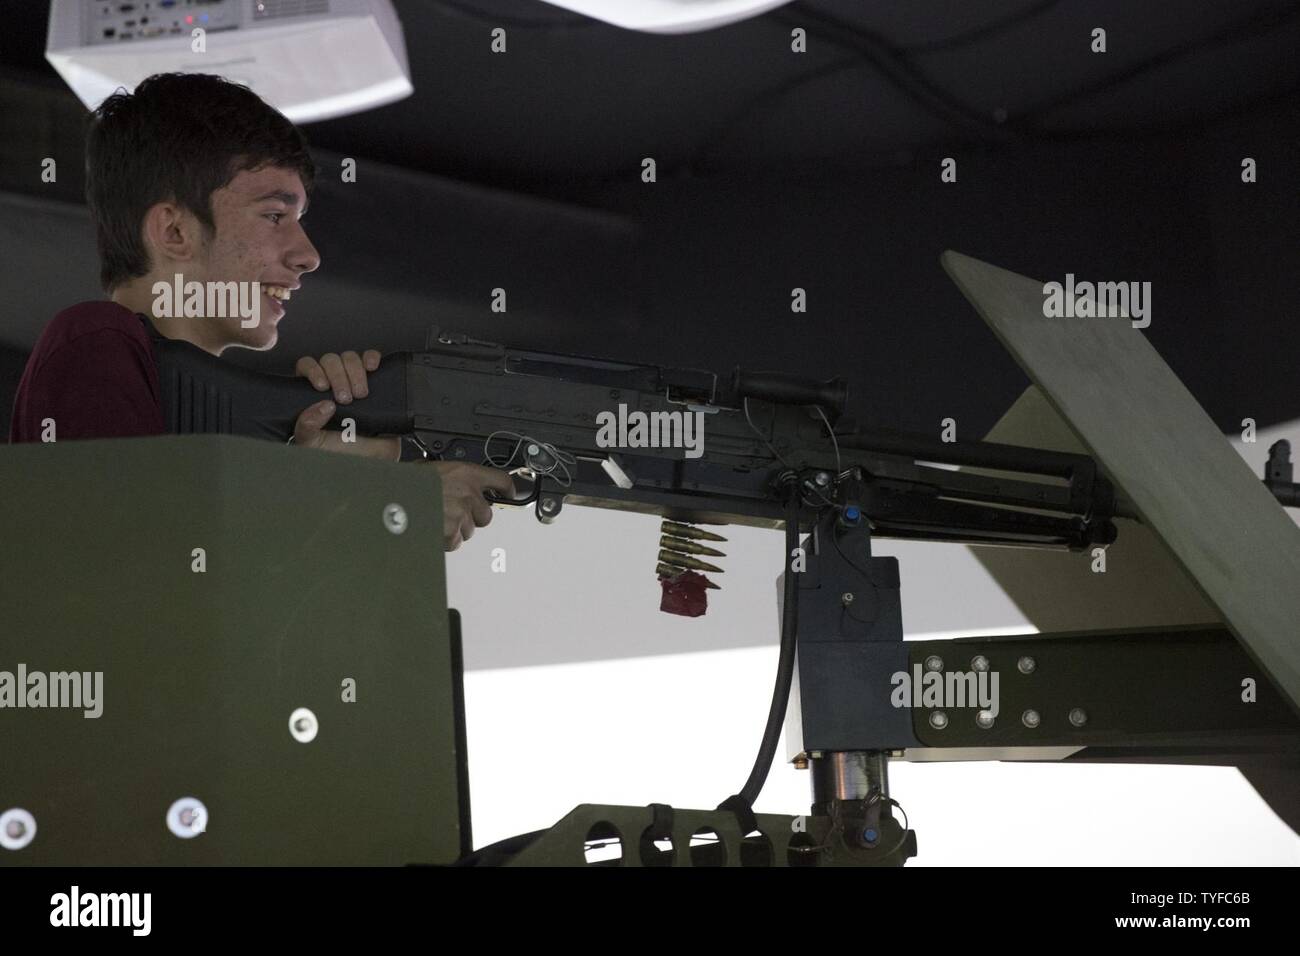 Jordan Foley, Boy Scout, Troop 377, fires a M249 Squad Automatic Weapon at the Convoy Combat Simulator aboard Marine Corps Air Ground Combat Center, Twentynine Palms, Calif., Nov. 5, 2016, during the Boy Scout Camp Out for local Boy Scouts of America troops. Stock Photo